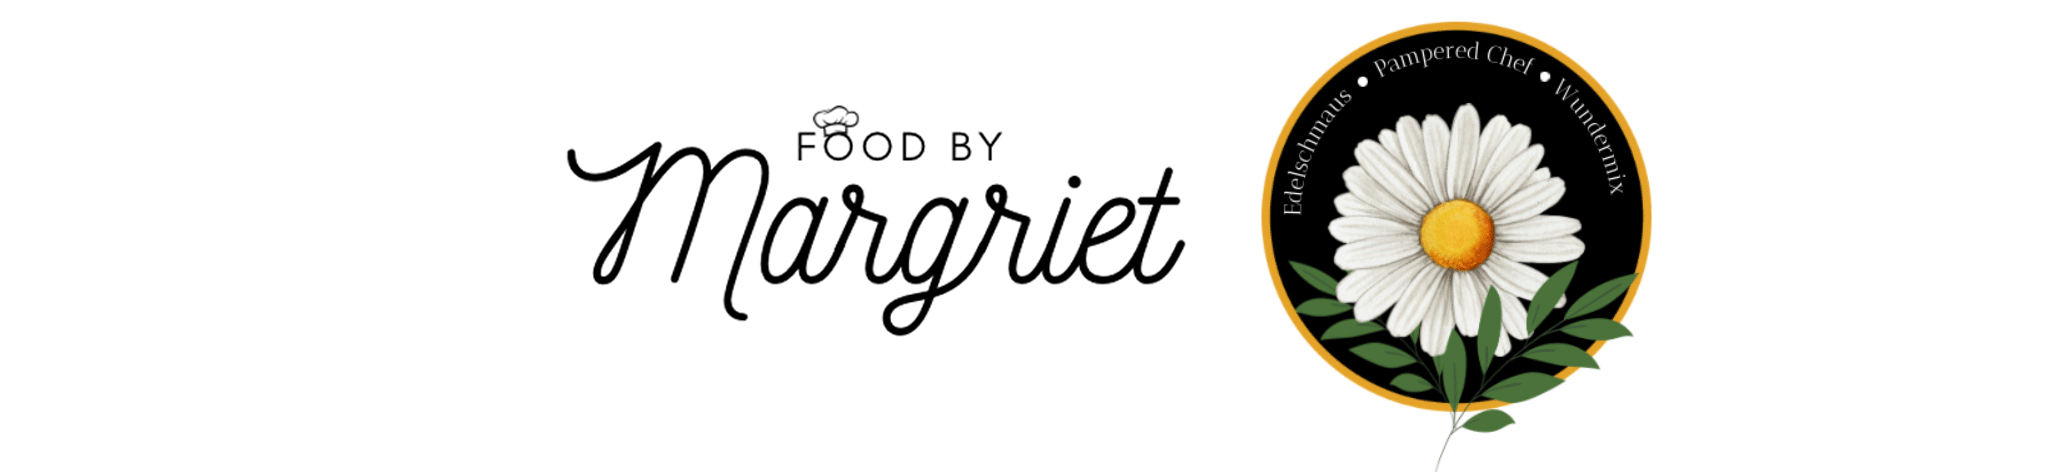 Food by Margriet